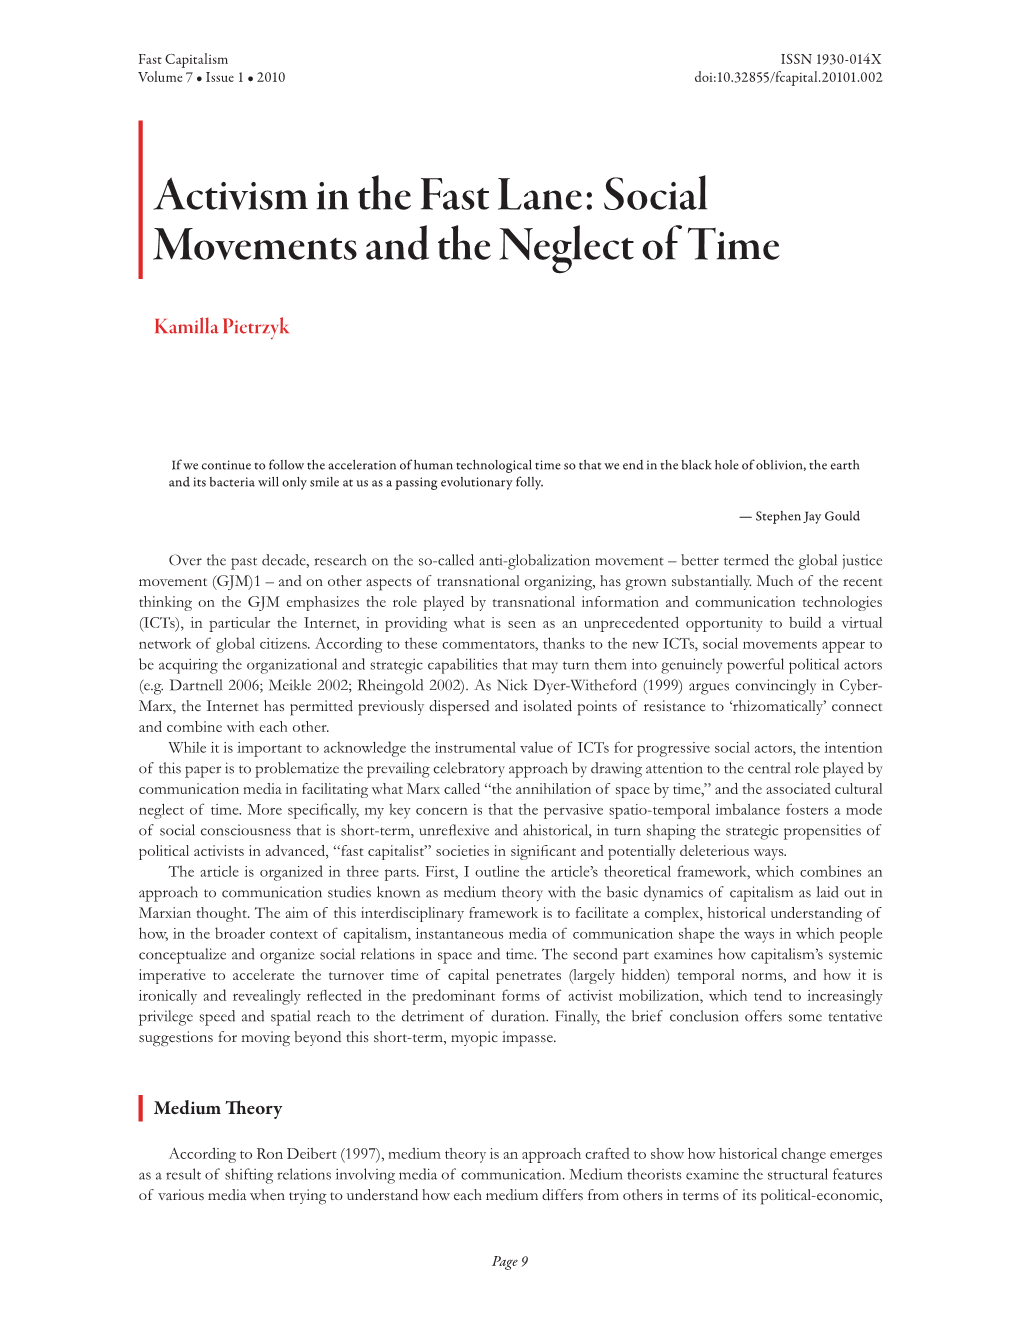 Social Movements and the Neglect of Time